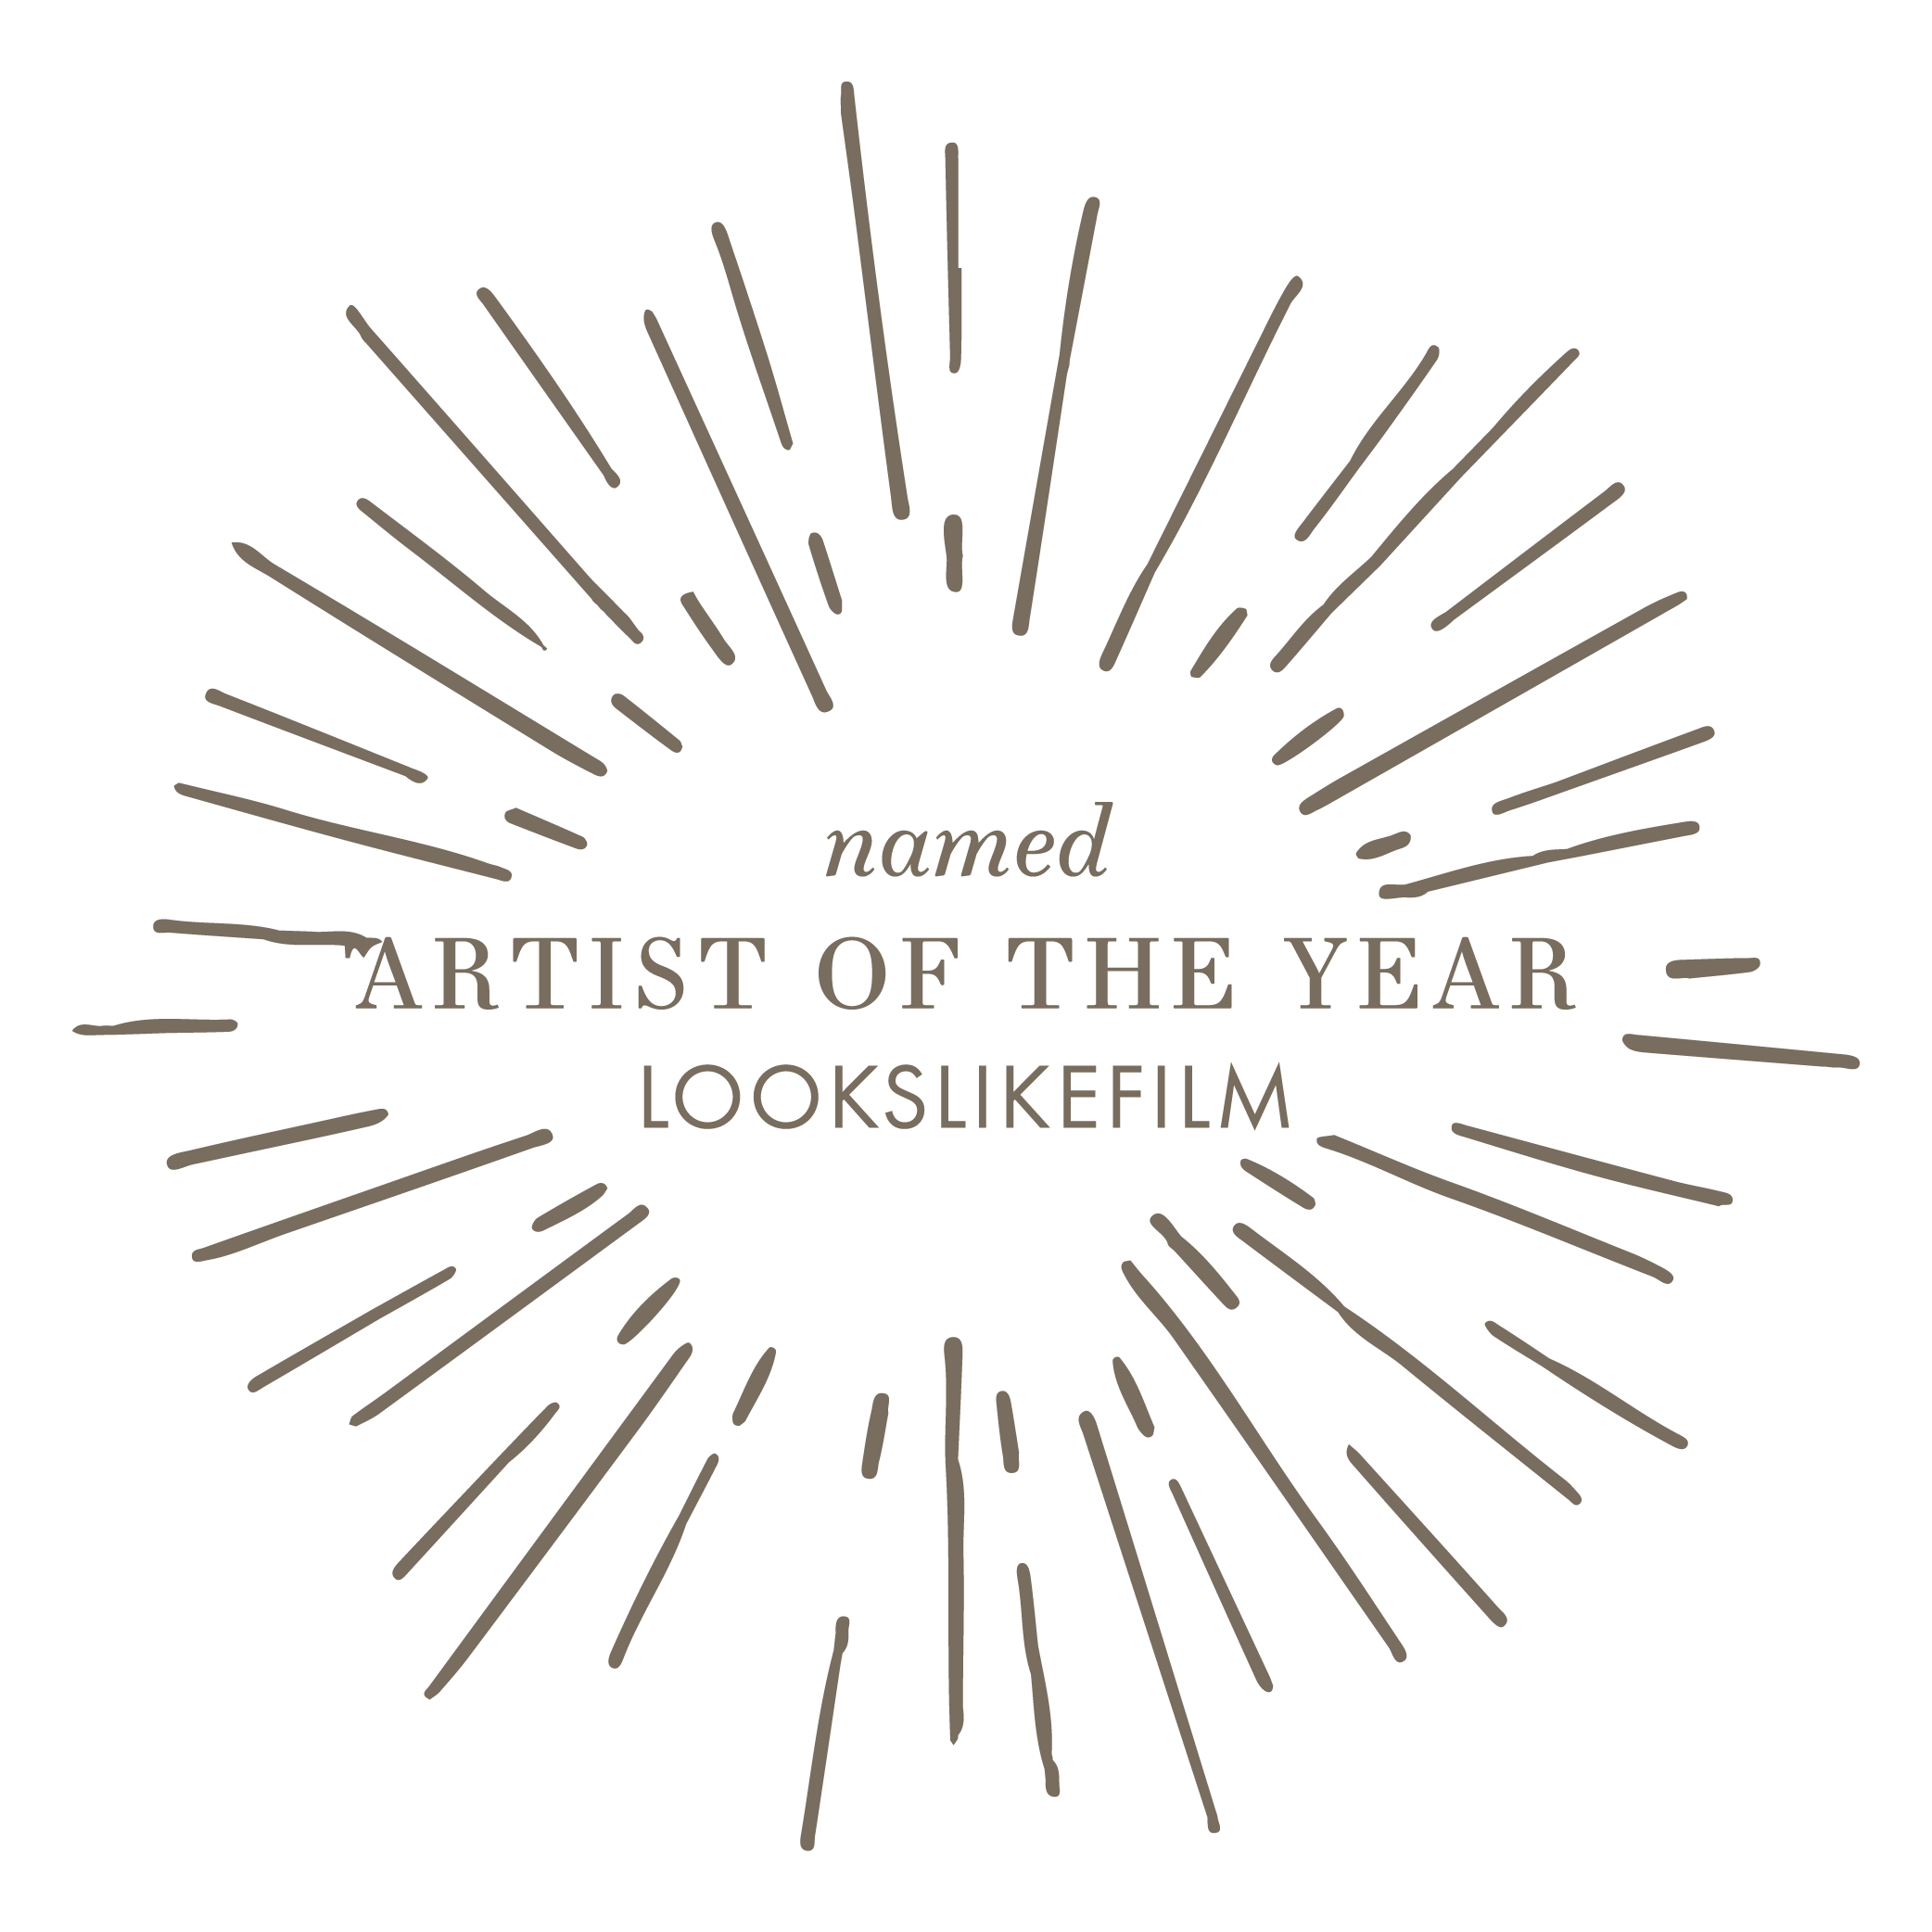 Angie Klaus Featured in Artist of the Year LooksLikeFilm